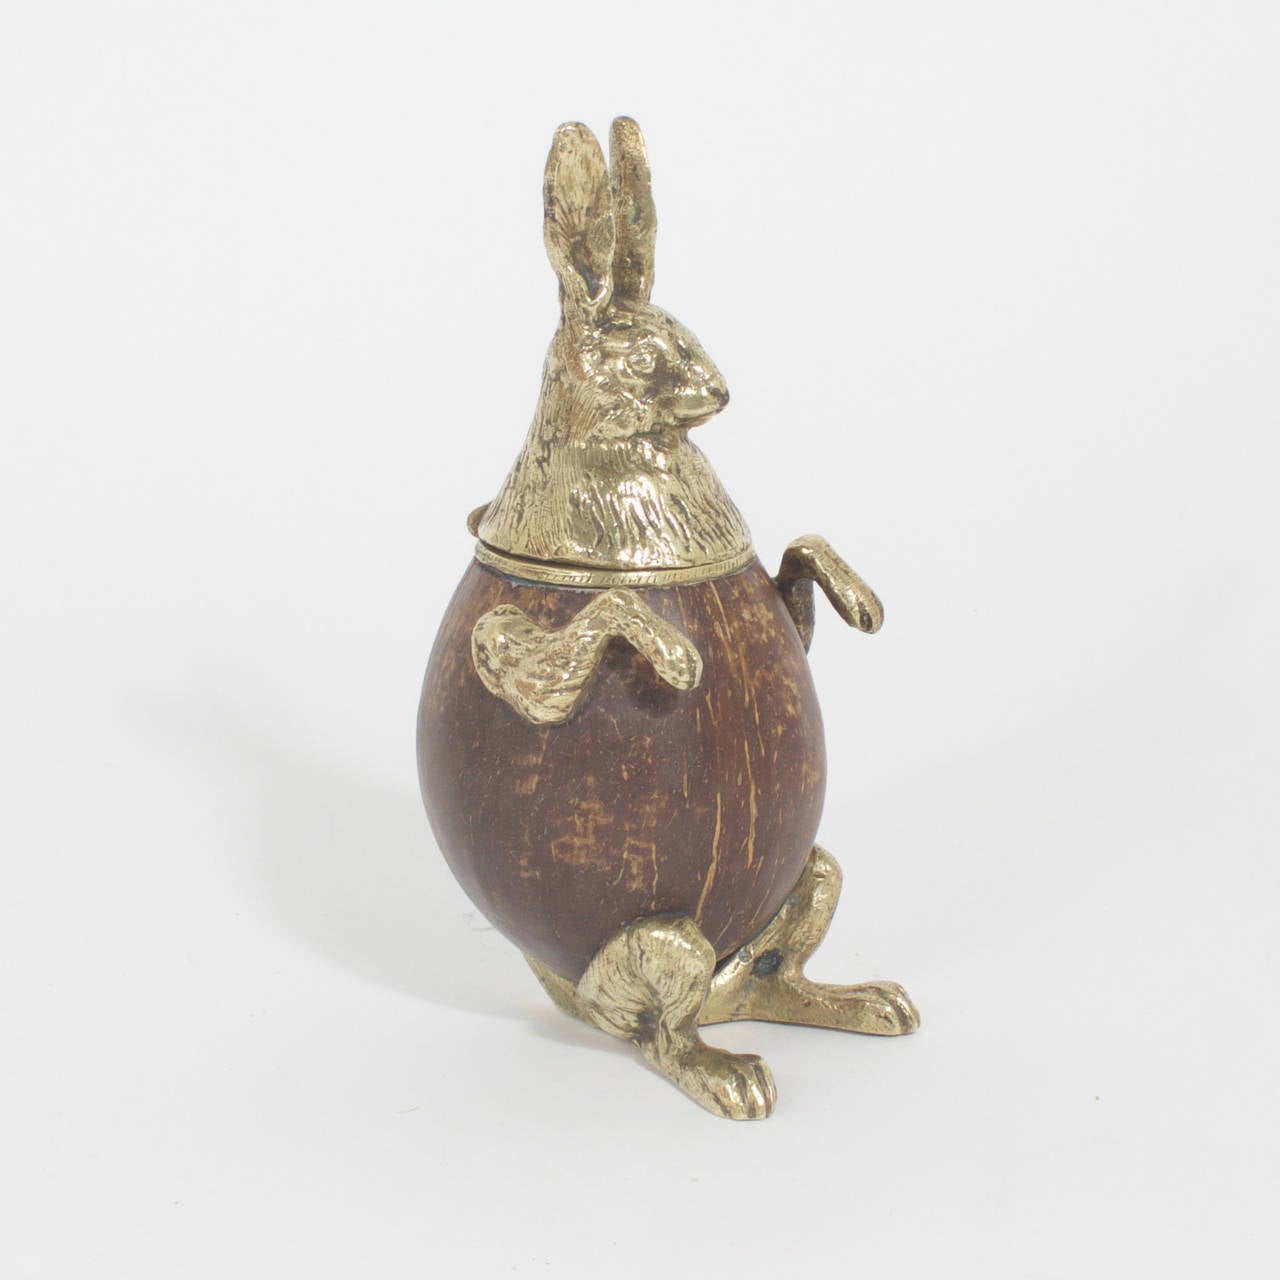 Pair of amusing Arthur Court trinket boxes or inkwells with brass rabbit heads, legs and arms. One having turned wood body the other a coconut bodyy. Signed Arthur Court and dated 1977 on the bottom of one rabbit. For sale individually at $575 each.